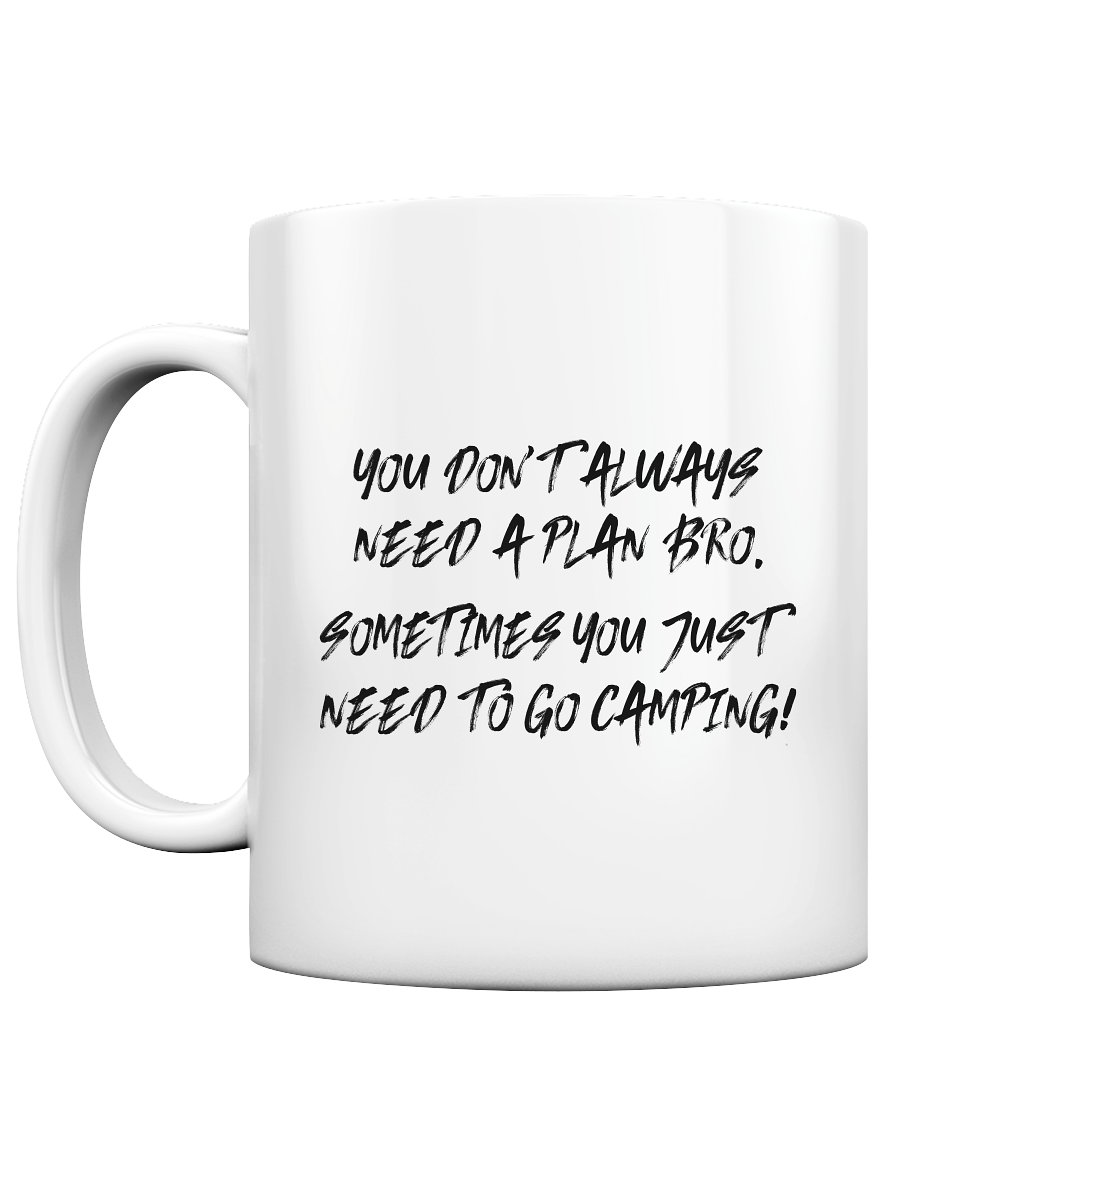 Don't Need A Plan - Just Go Camping - Tasse glossy